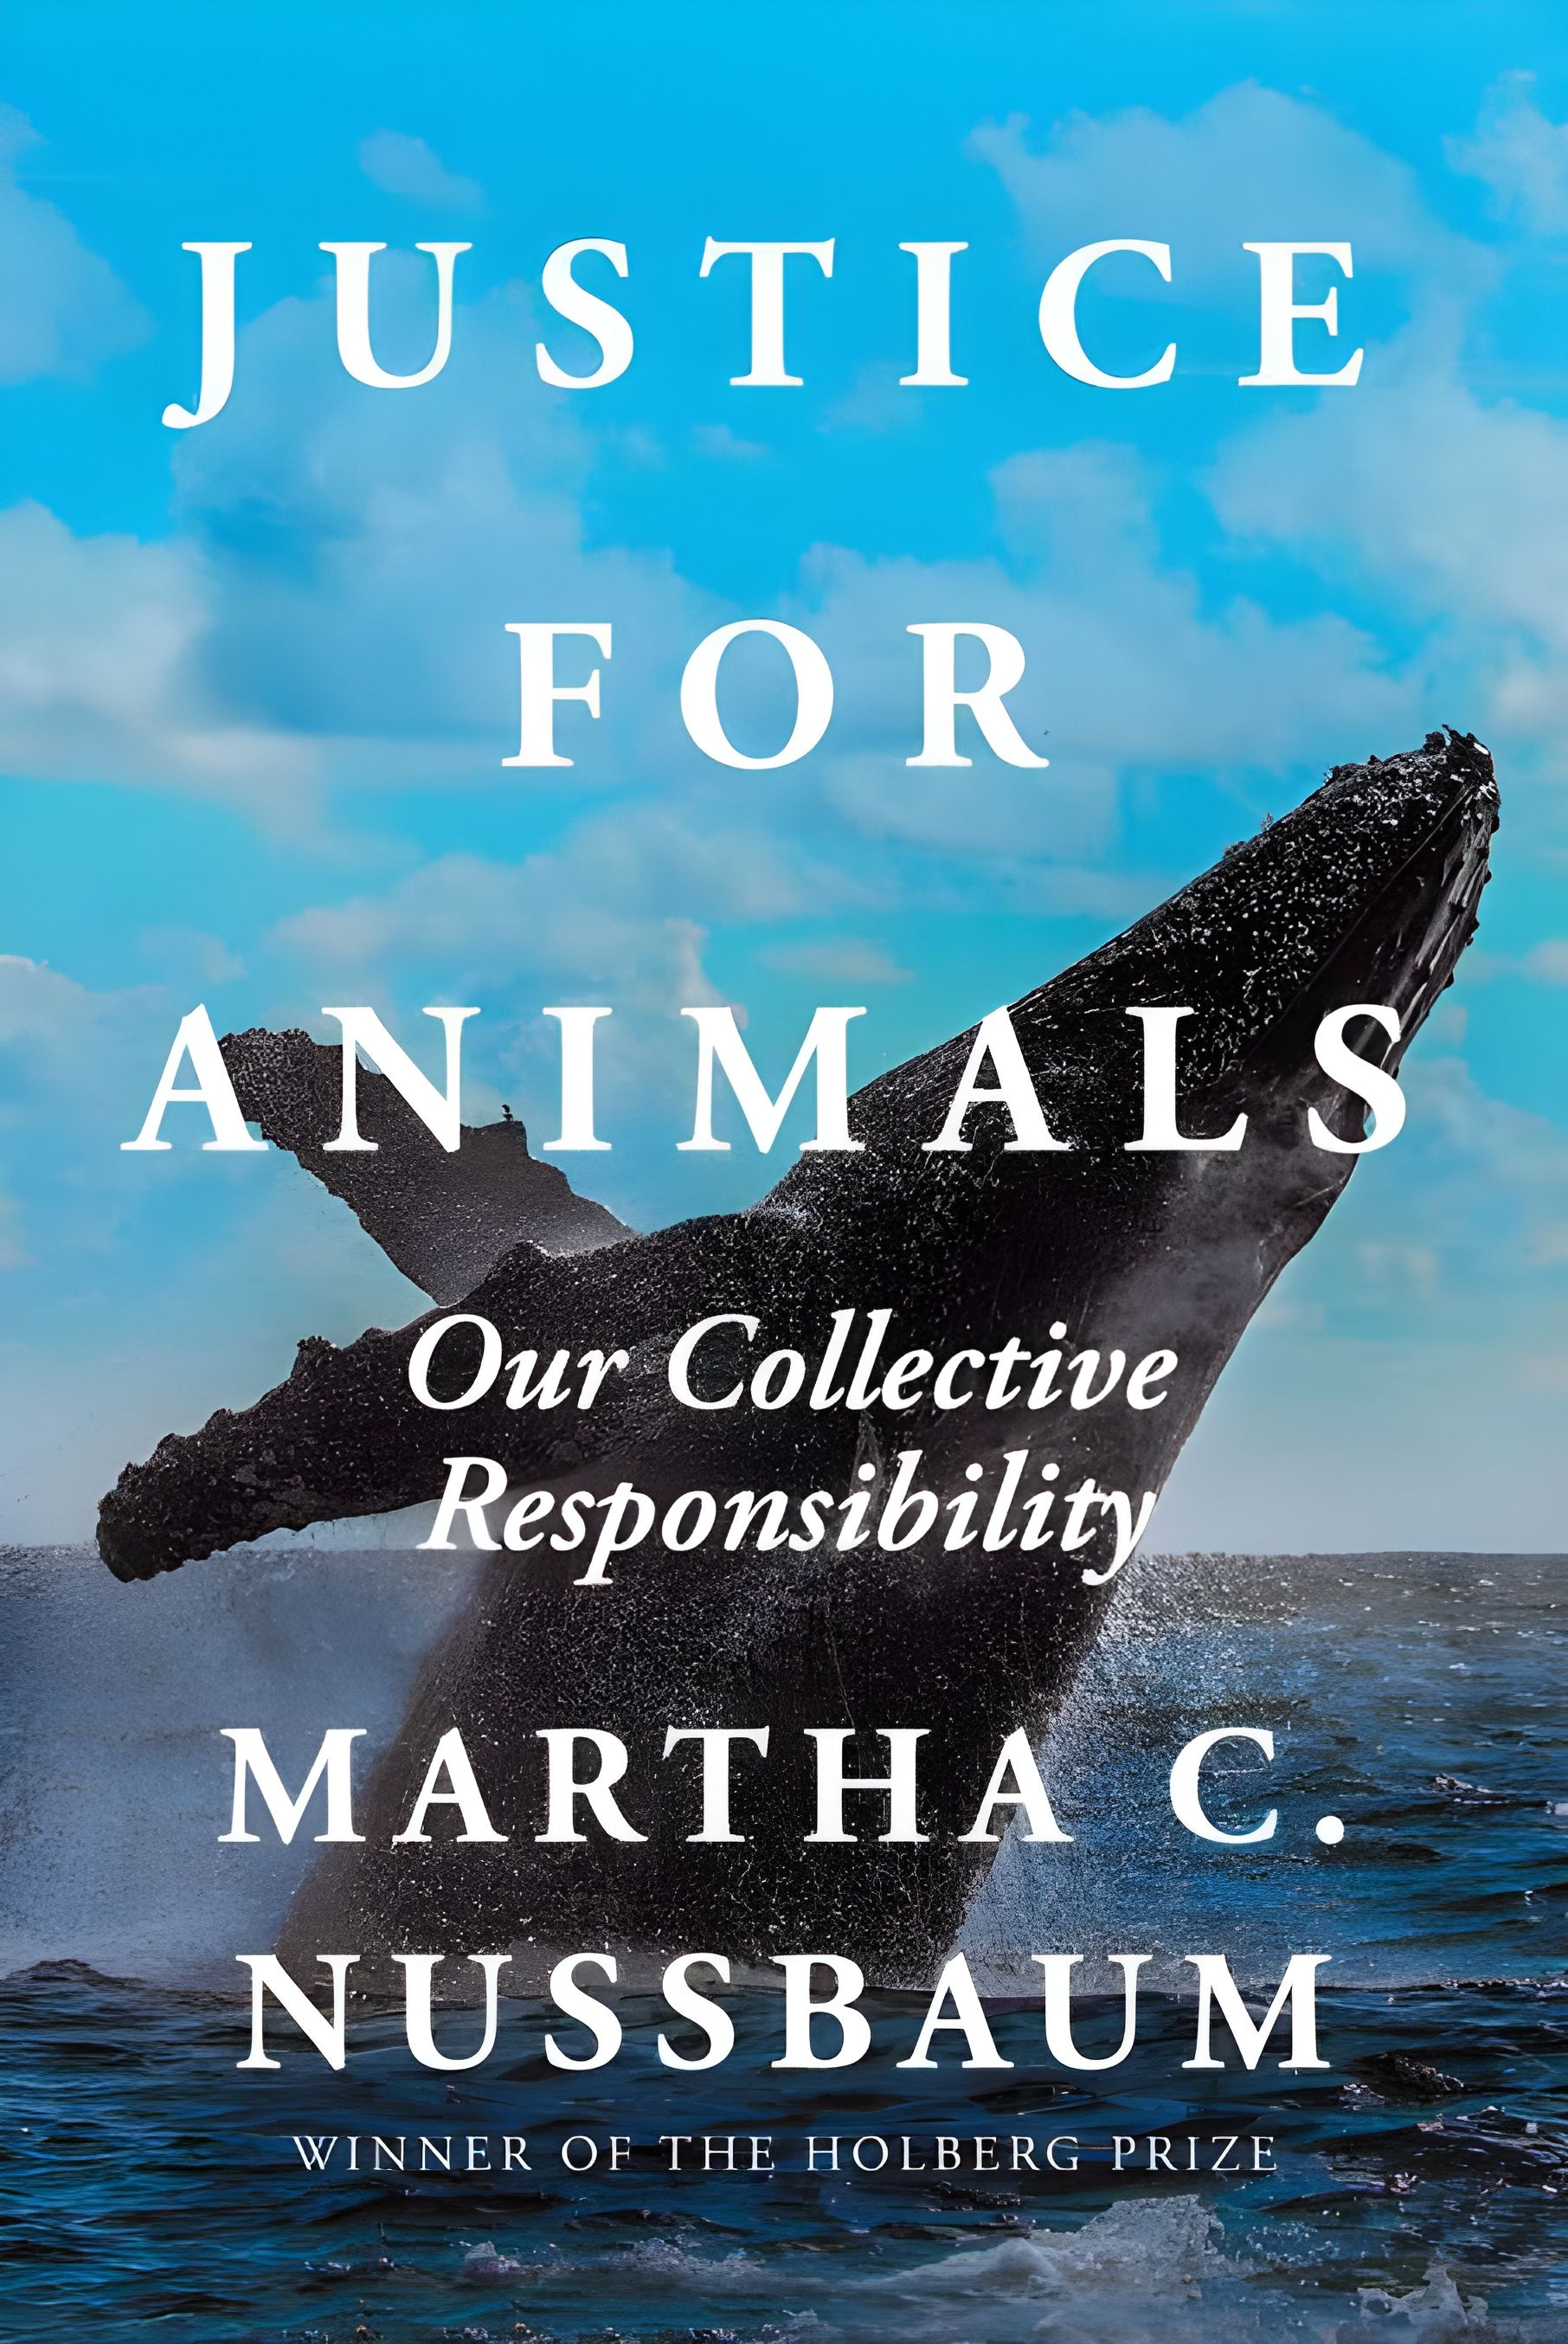 "Justice for Animals" Book Reaction